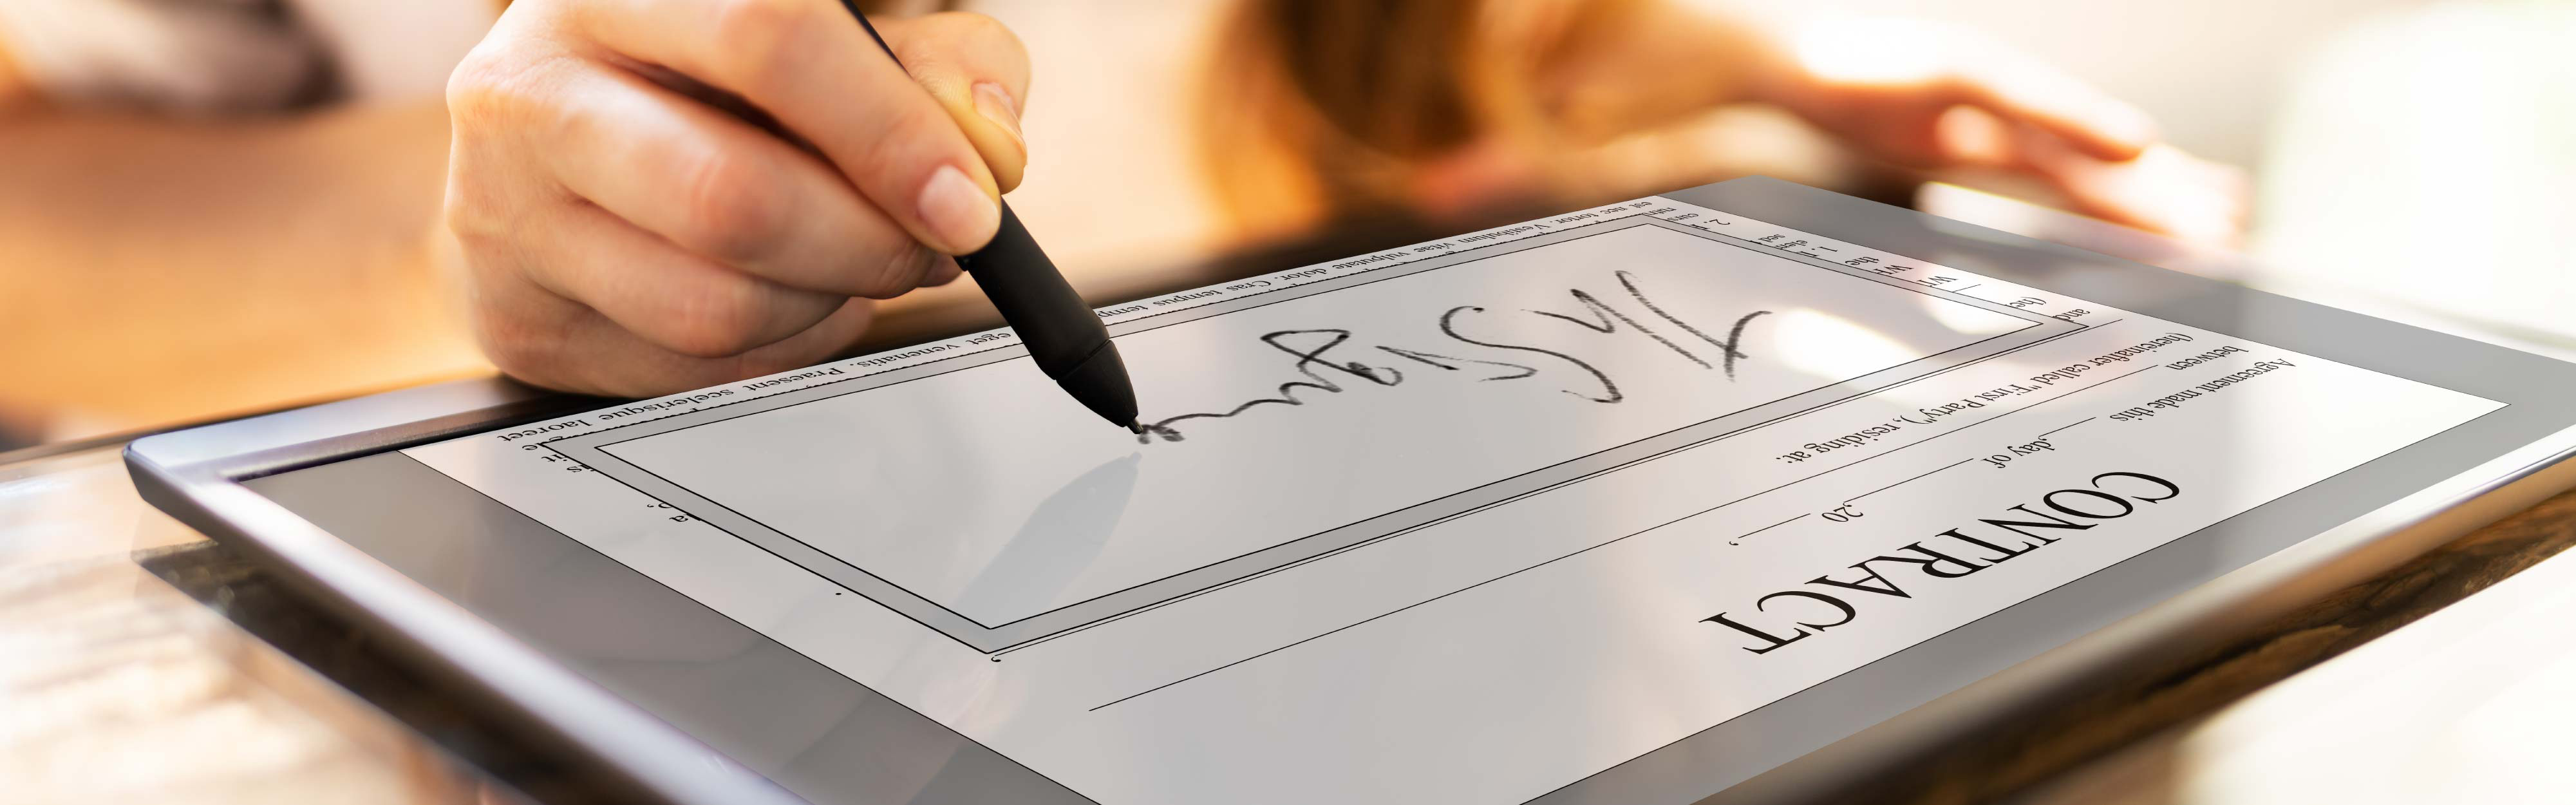 Beyond the Pen: The Art and Science of Efficient Digital Signatures